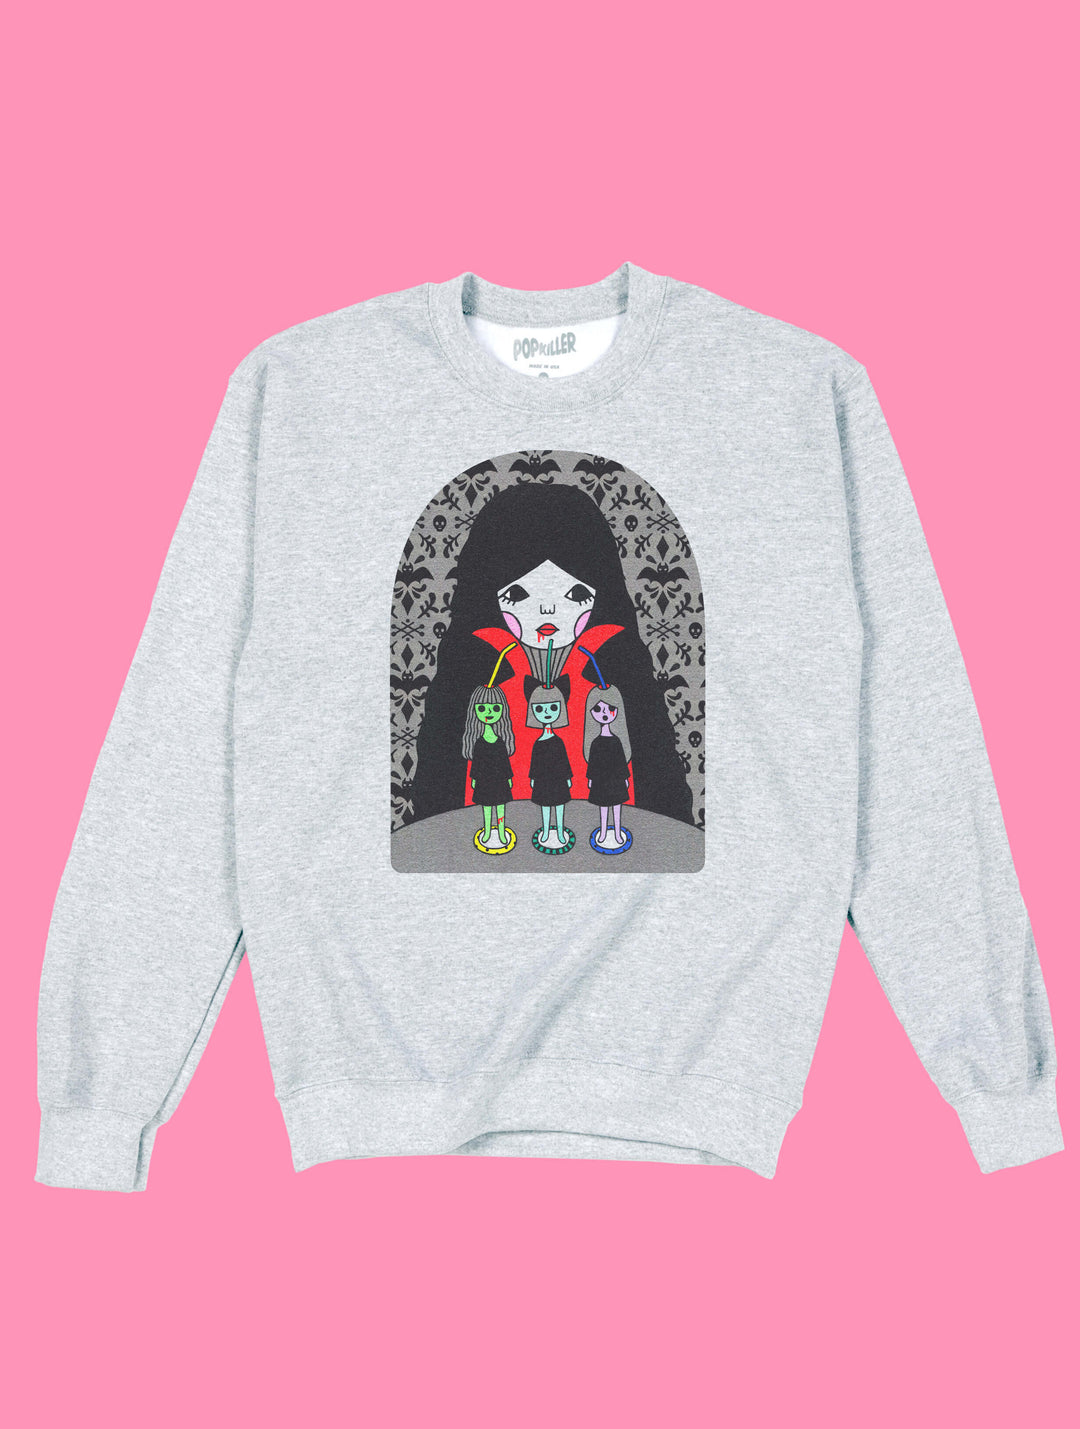 Kawaii goth vampire boss babe drinking blood graphic sweater in ash color.